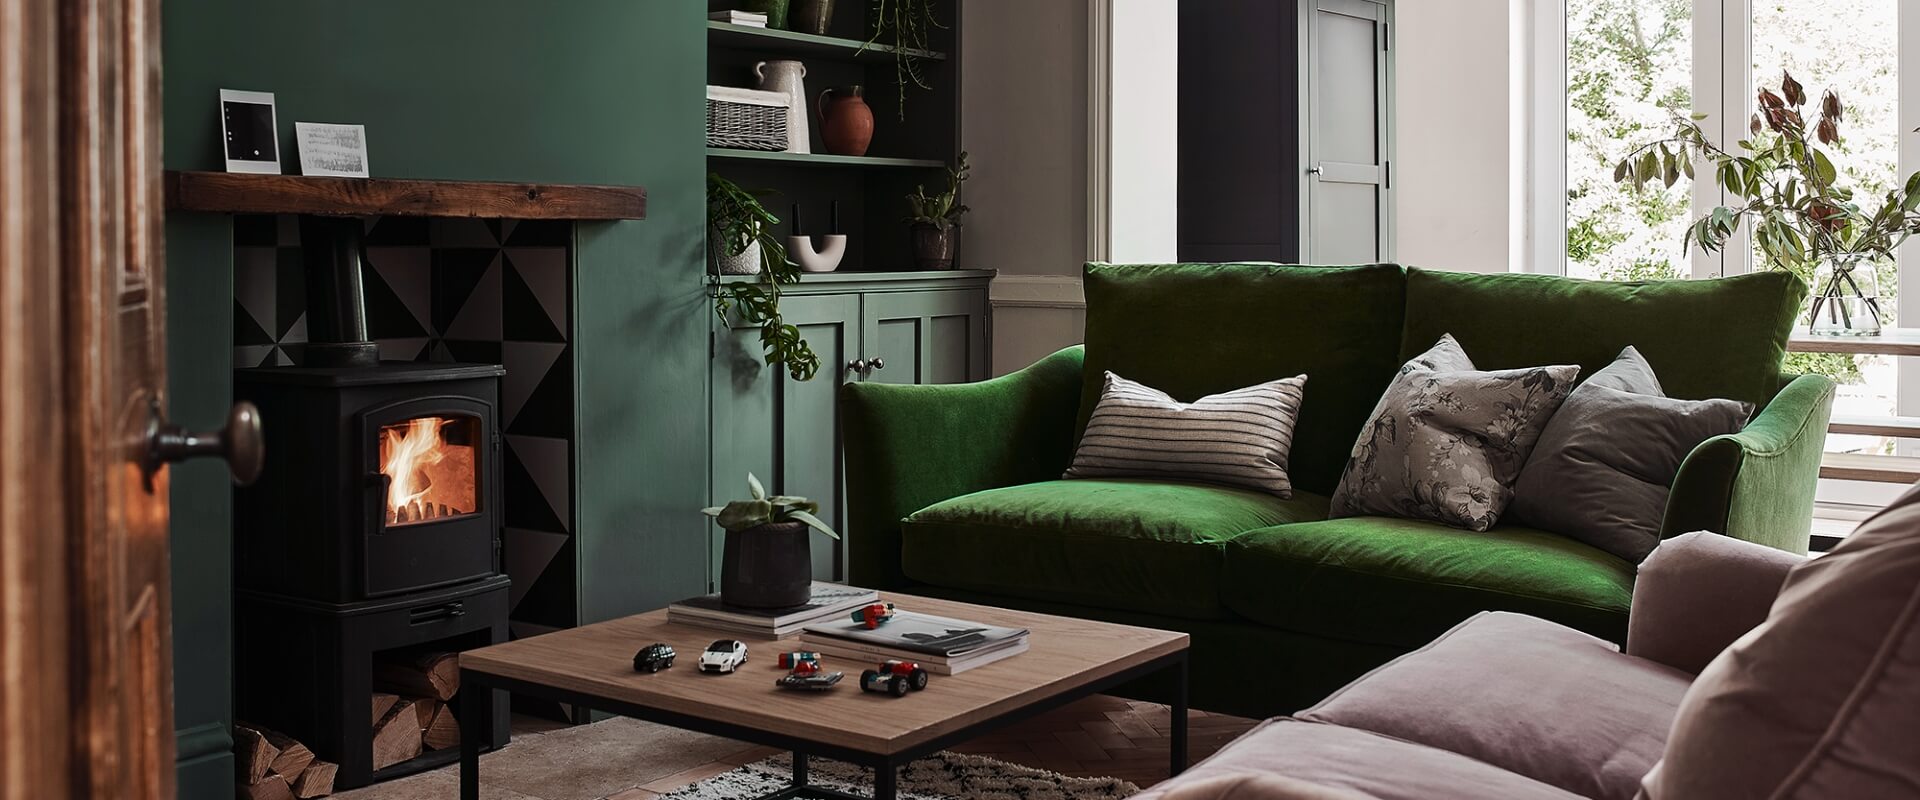 Cosy bright green font room with log burner